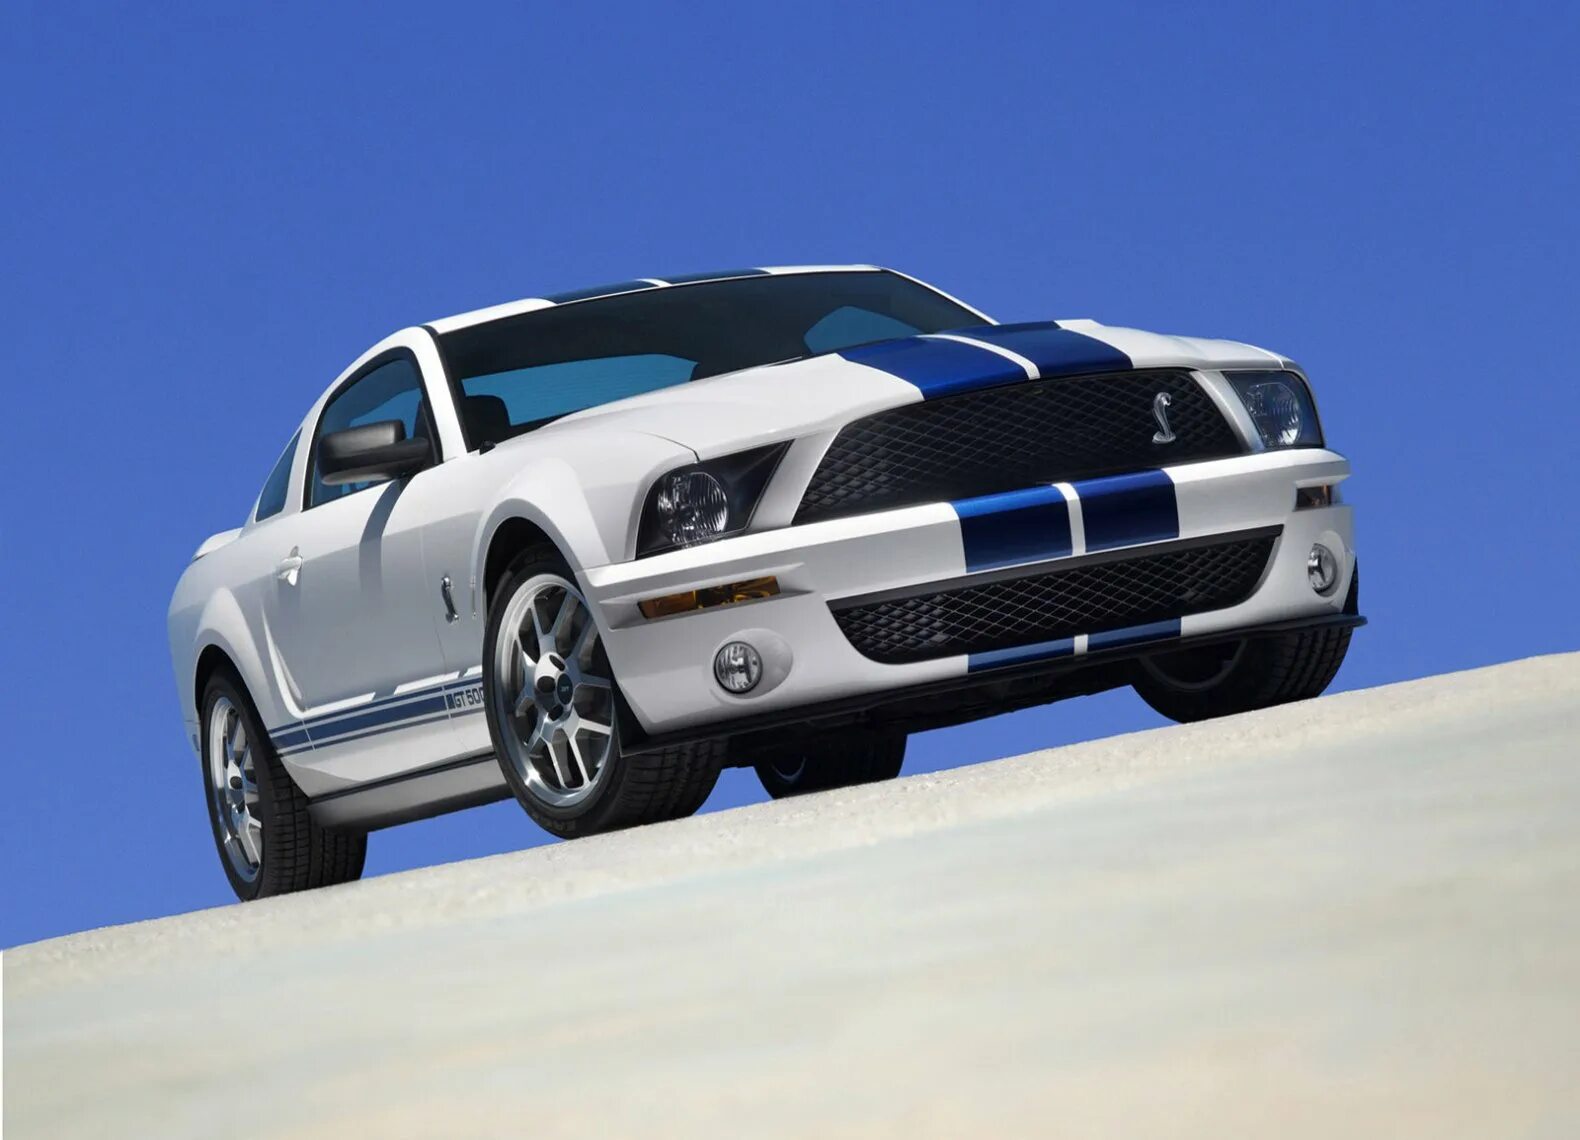 Mustang shelby gt. Форд Мустанг gt 500. Форд Мустанг gt 500 Shelby. Ford Mustang Shelby gt500 2022. Форд Мустанг Кобра gt500.